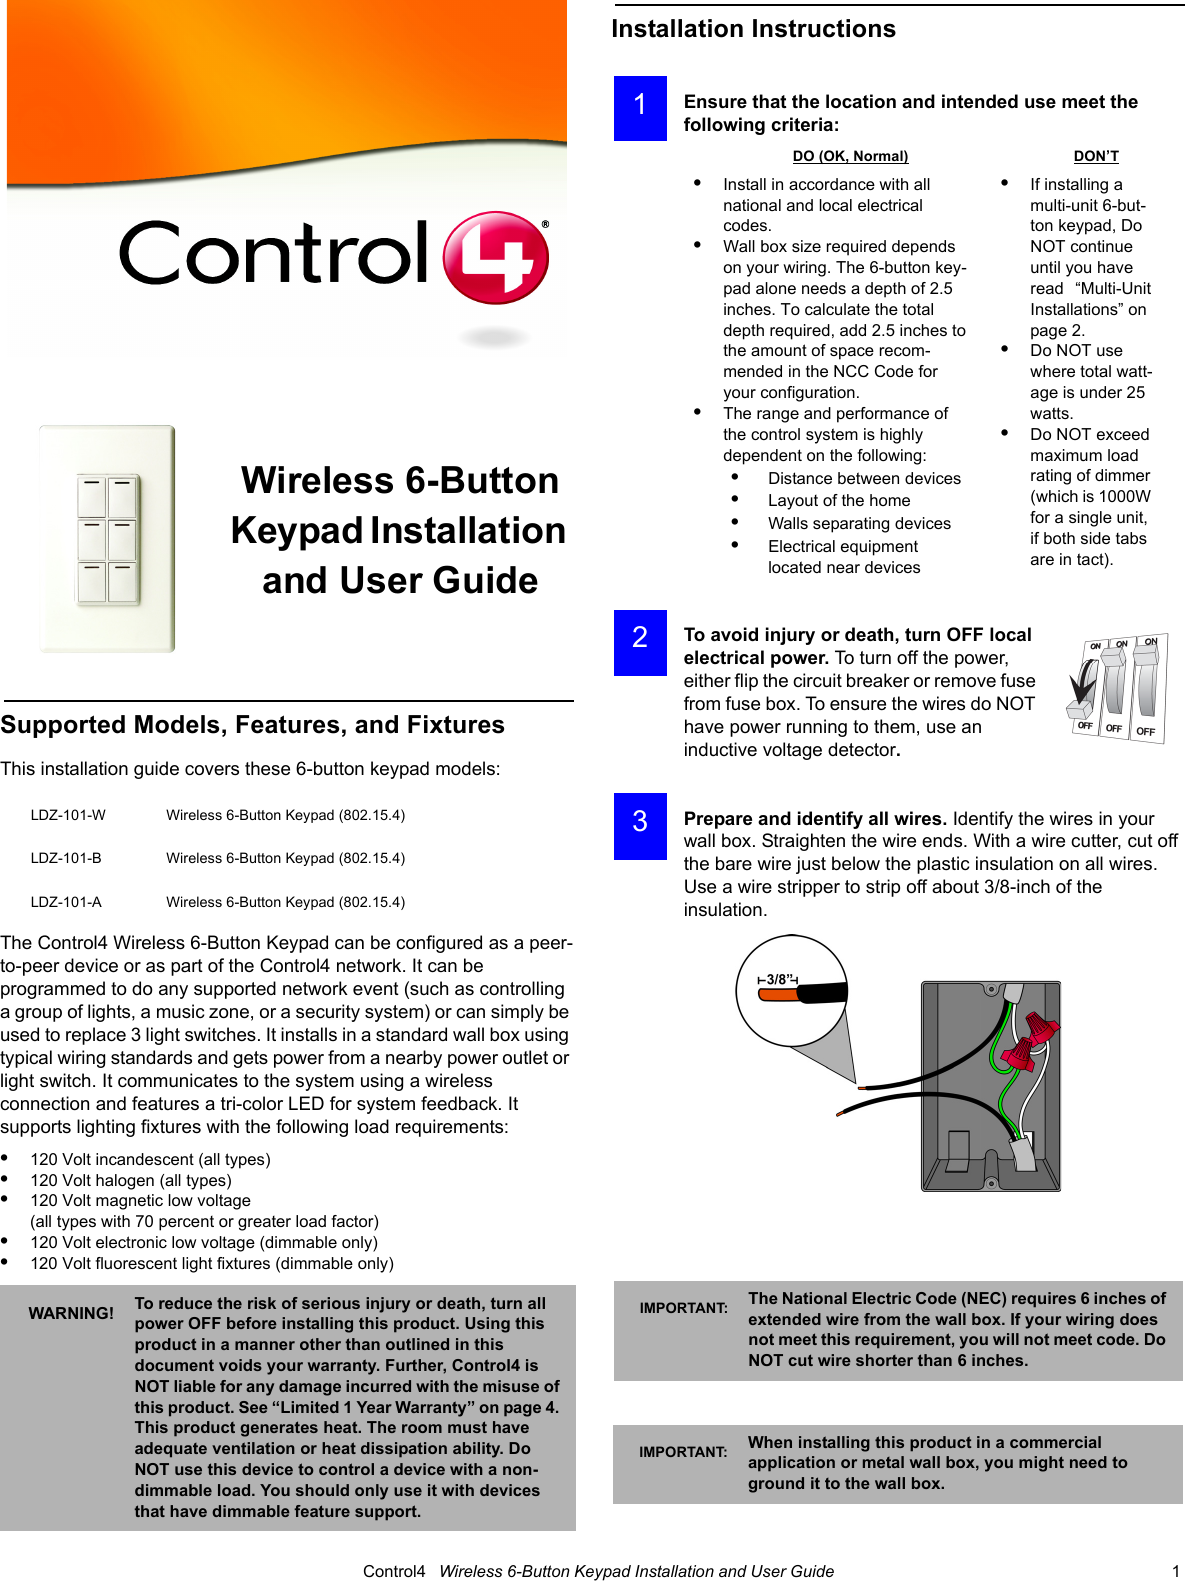                                                                                                                                      Control4   Wireless 6-Button Keypad Installation and User Guide                                                                              1 Wireless 6-Button Keypad Installation and User GuideSupported Models, Features, and FixturesThis installation guide covers these 6-button keypad models:The Control4 Wireless 6-Button Keypad can be configured as a peer-to-peer device or as part of the Control4 network. It can be programmed to do any supported network event (such as controlling a group of lights, a music zone, or a security system) or can simply be used to replace 3 light switches. It installs in a standard wall box using typical wiring standards and gets power from a nearby power outlet or light switch. It communicates to the system using a wireless connection and features a tri-color LED for system feedback. It supports lighting fixtures with the following load requirements:•120 Volt incandescent (all types)•120 Volt halogen (all types)•120 Volt magnetic low voltage (all types with 70 percent or greater load factor)•120 Volt electronic low voltage (dimmable only) •120 Volt fluorescent light fixtures (dimmable only)Installation InstructionsEnsure that the location and intended use meet the following criteria:To avoid injury or death, turn OFF local electrical power. To turn off the power, either flip the circuit breaker or remove fuse from fuse box. To ensure the wires do NOT have power running to them, use an inductive voltage detector.Prepare and identify all wires. Identify the wires in your wall box. Straighten the wire ends. With a wire cutter, cut off the bare wire just below the plastic insulation on all wires. Use a wire stripper to strip off about 3/8-inch of the insulation. LDZ-101-W Wireless 6-Button Keypad (802.15.4)LDZ-101-B Wireless 6-Button Keypad (802.15.4)LDZ-101-A Wireless 6-Button Keypad (802.15.4)WARNING! To reduce the risk of serious injury or death, turn all power OFF before installing this product. Using this product in a manner other than outlined in this document voids your warranty. Further, Control4 is NOT liable for any damage incurred with the misuse of this product. See “Limited 1 Year Warranty” on page 4. This product generates heat. The room must have adequate ventilation or heat dissipation ability. Do NOT use this device to control a device with a non-dimmable load. You should only use it with devices that have dimmable feature support.DO (OK, Normal) DON’T•Install in accordance with all national and local electrical codes.•Wall box size required depends on your wiring. The 6-button key-pad alone needs a depth of 2.5 inches. To calculate the total depth required, add 2.5 inches to the amount of space recom-mended in the NCC Code for your configuration.•The range and performance of the control system is highly dependent on the following:•    Distance between devices•    Layout of the home•    Walls separating devices•    Electrical equipment located near devices•If installing a multi-unit 6-but-ton keypad, Do NOT continue until you have read   “Multi-Unit Installations” on page 2.•Do NOT use where total watt-age is under 25 watts.•Do NOT exceed maximum load rating of dimmer (which is 1000W for a single unit, if both side tabs are in tact).IMPORTANT: The National Electric Code (NEC) requires 6 inches of extended wire from the wall box. If your wiring does not meet this requirement, you will not meet code. Do NOT cut wire shorter than 6 inches.IMPORTANT: When installing this product in a commercial application or metal wall box, you might need to ground it to the wall box. 1 2 3